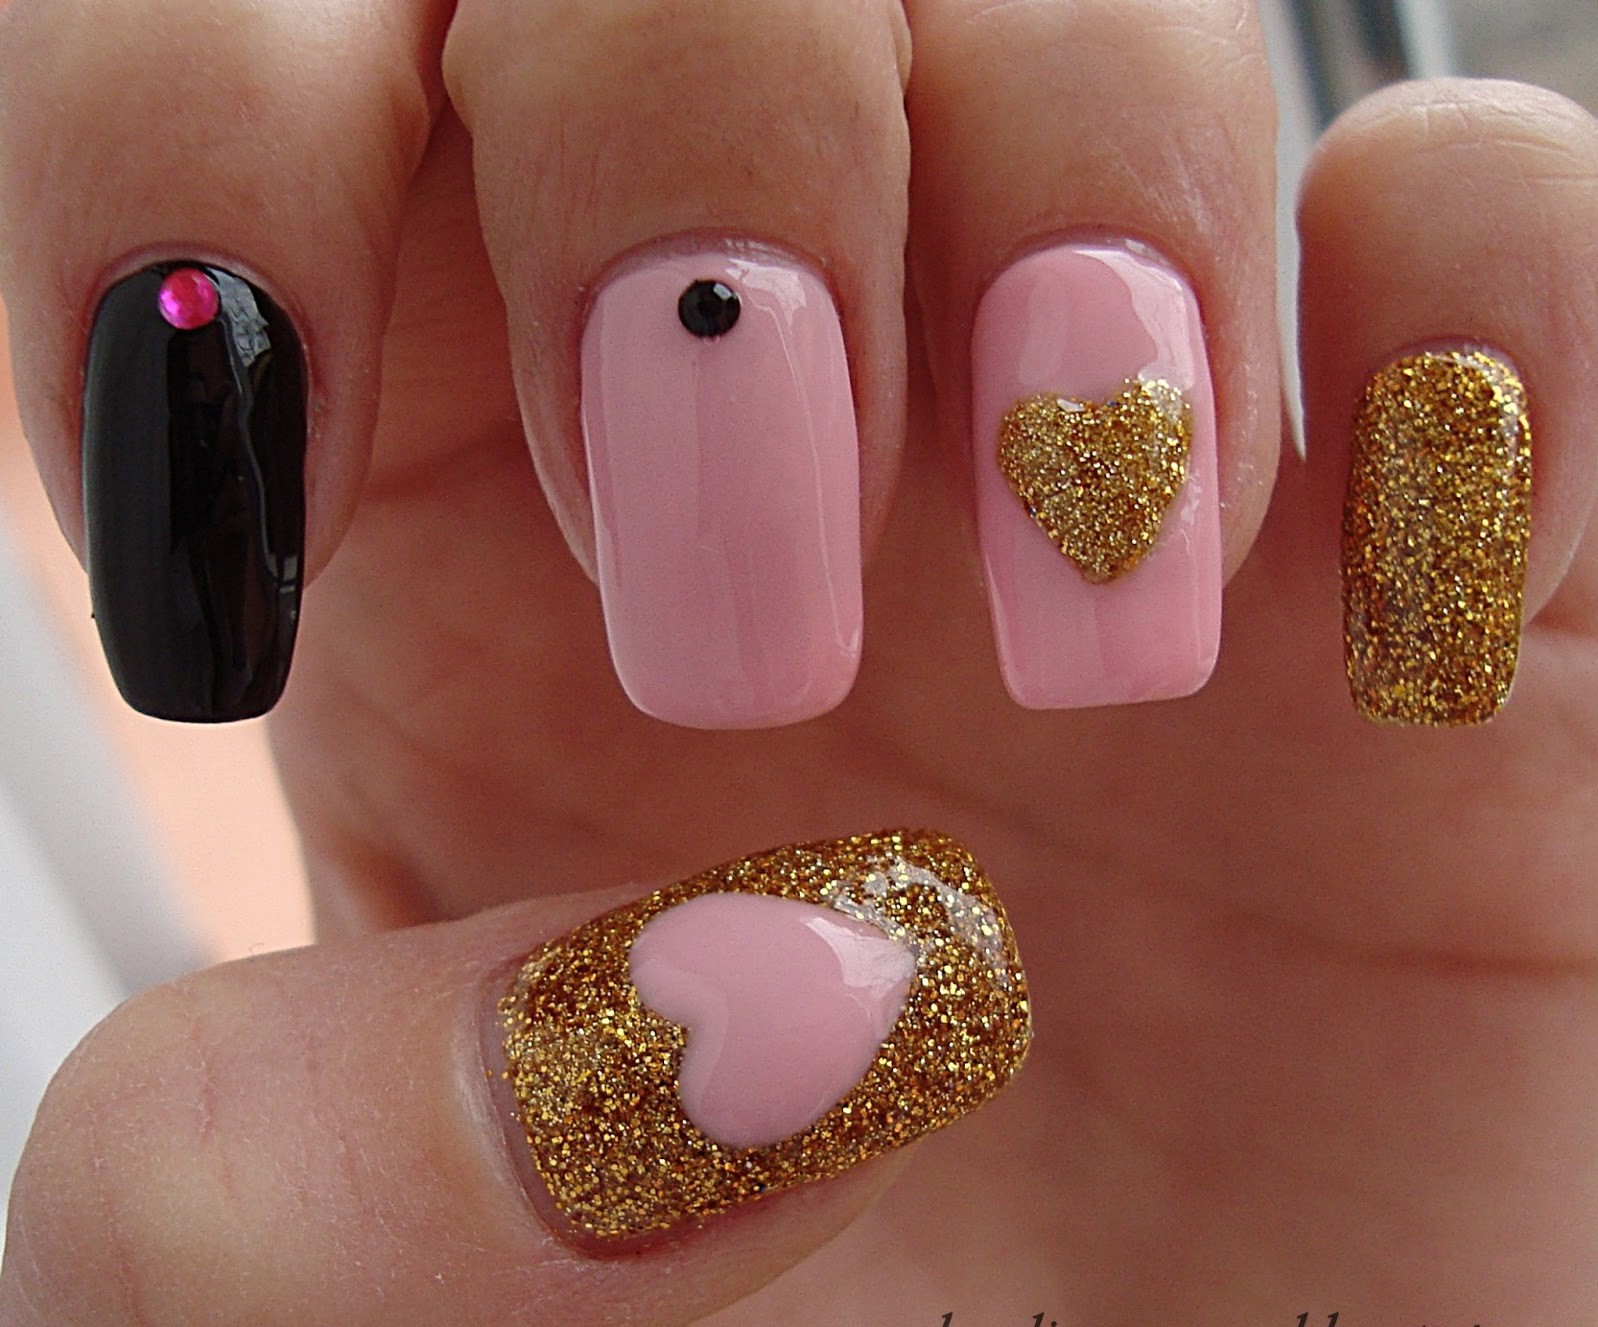 6. "Rose Quartz Nail Art with Crystal Centers" - wide 3